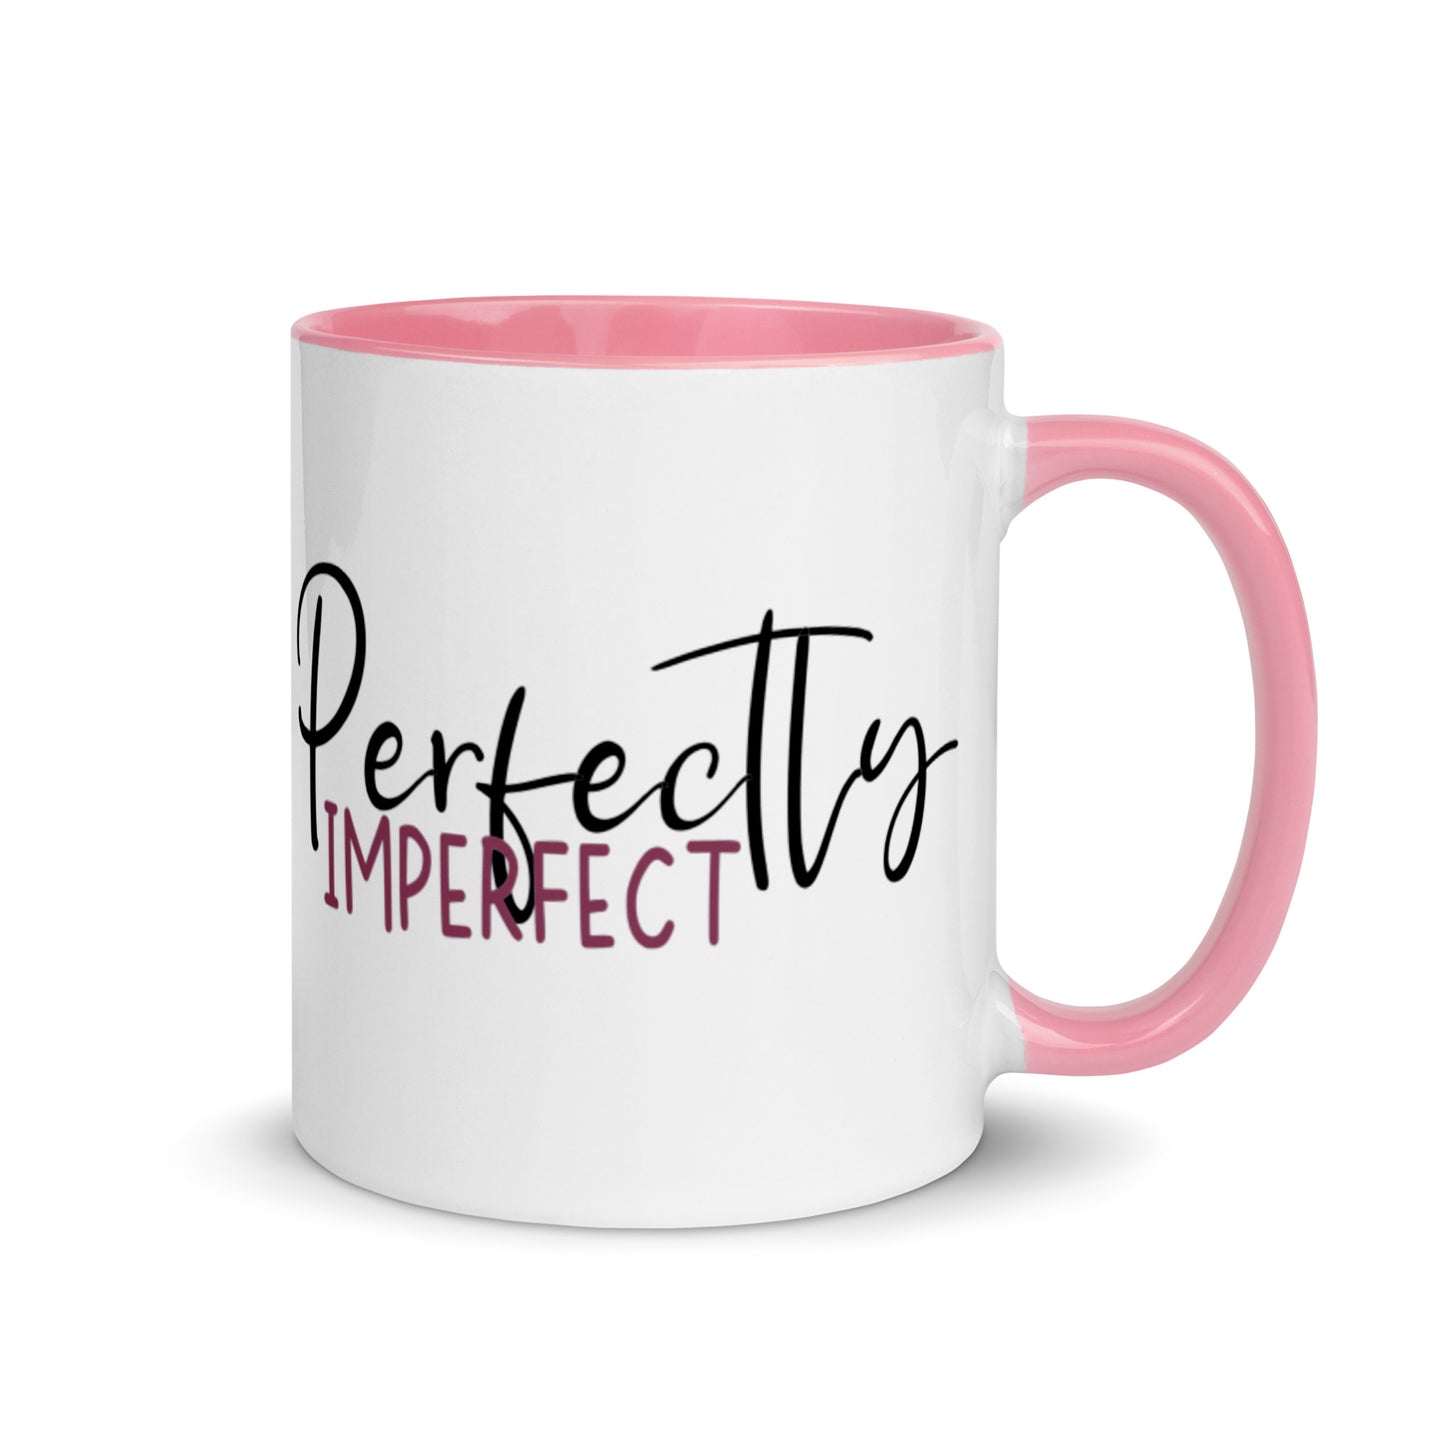 Perfectly imperfect mug with pink interior and handle